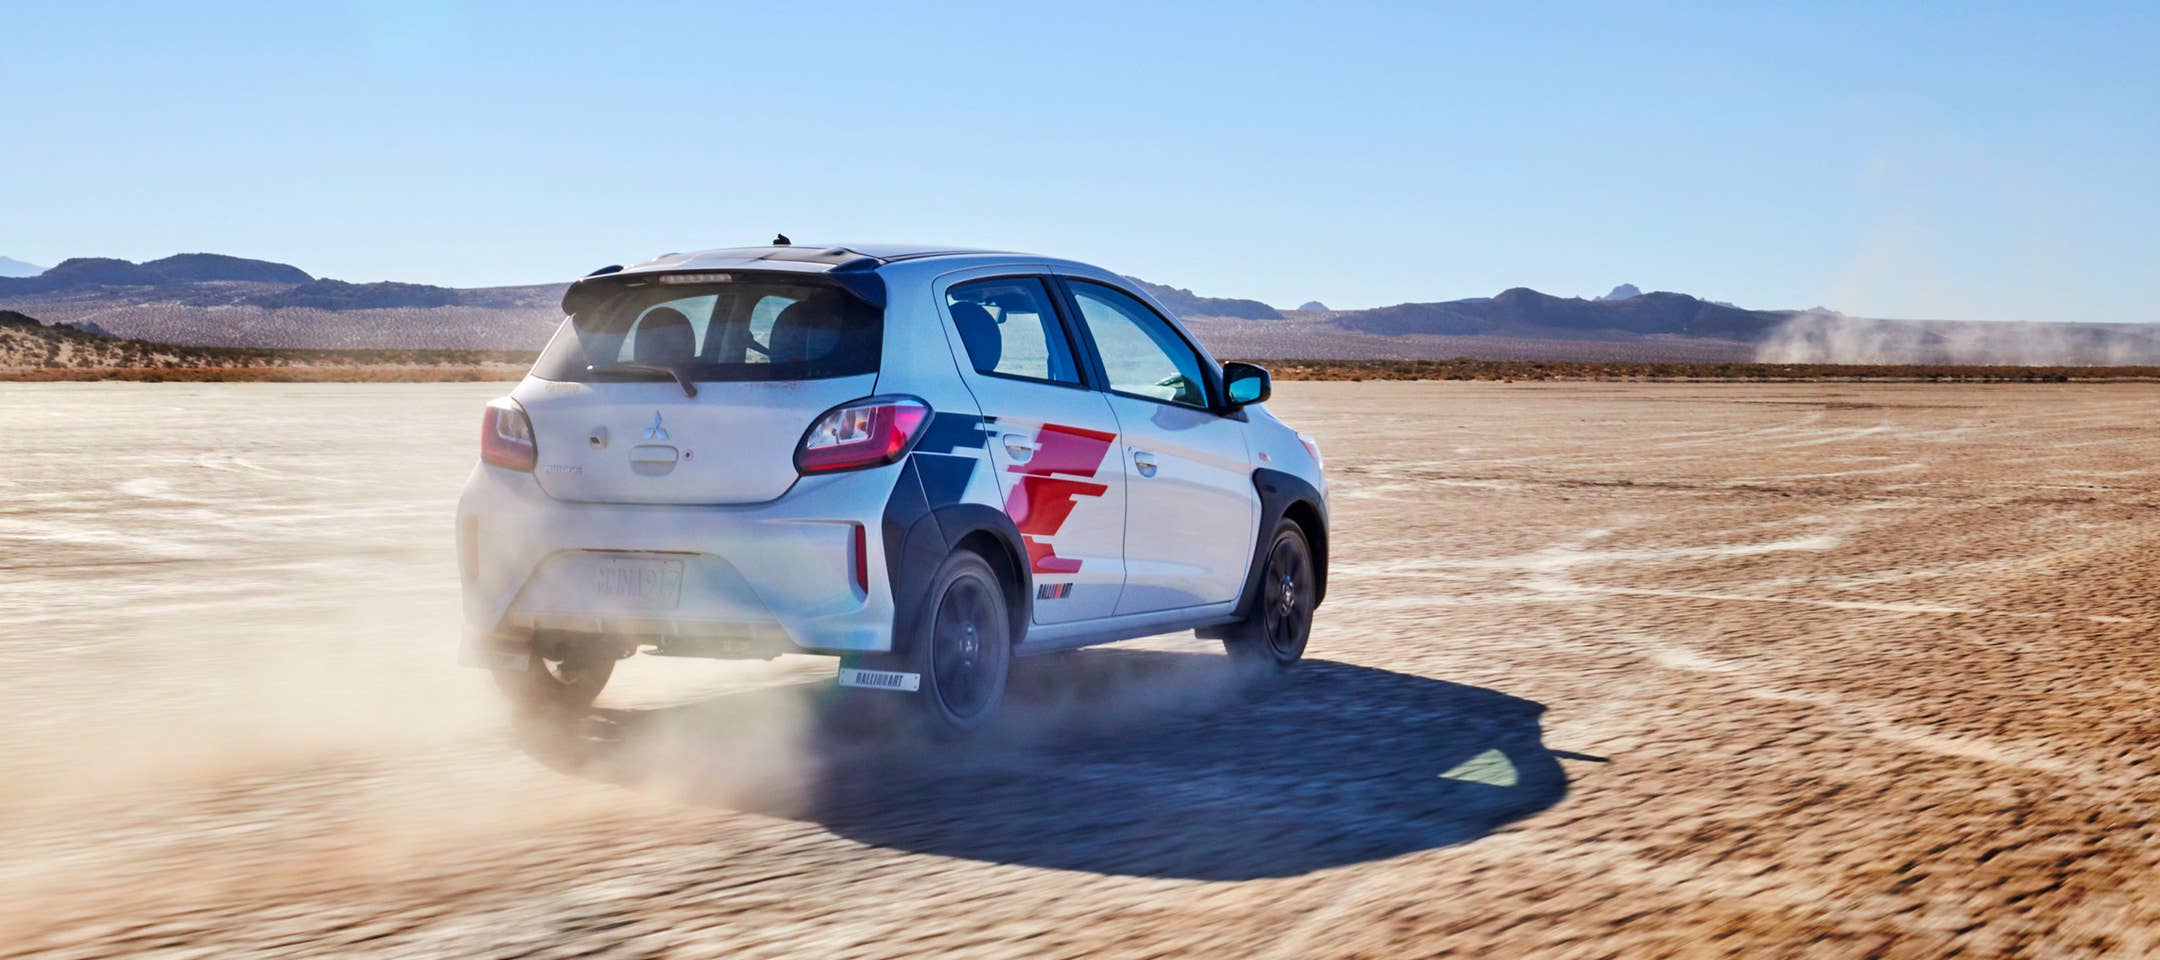 Angled back view of a 2023 Mitsubishi Ralliart Edition Mirage hatchback in the desert